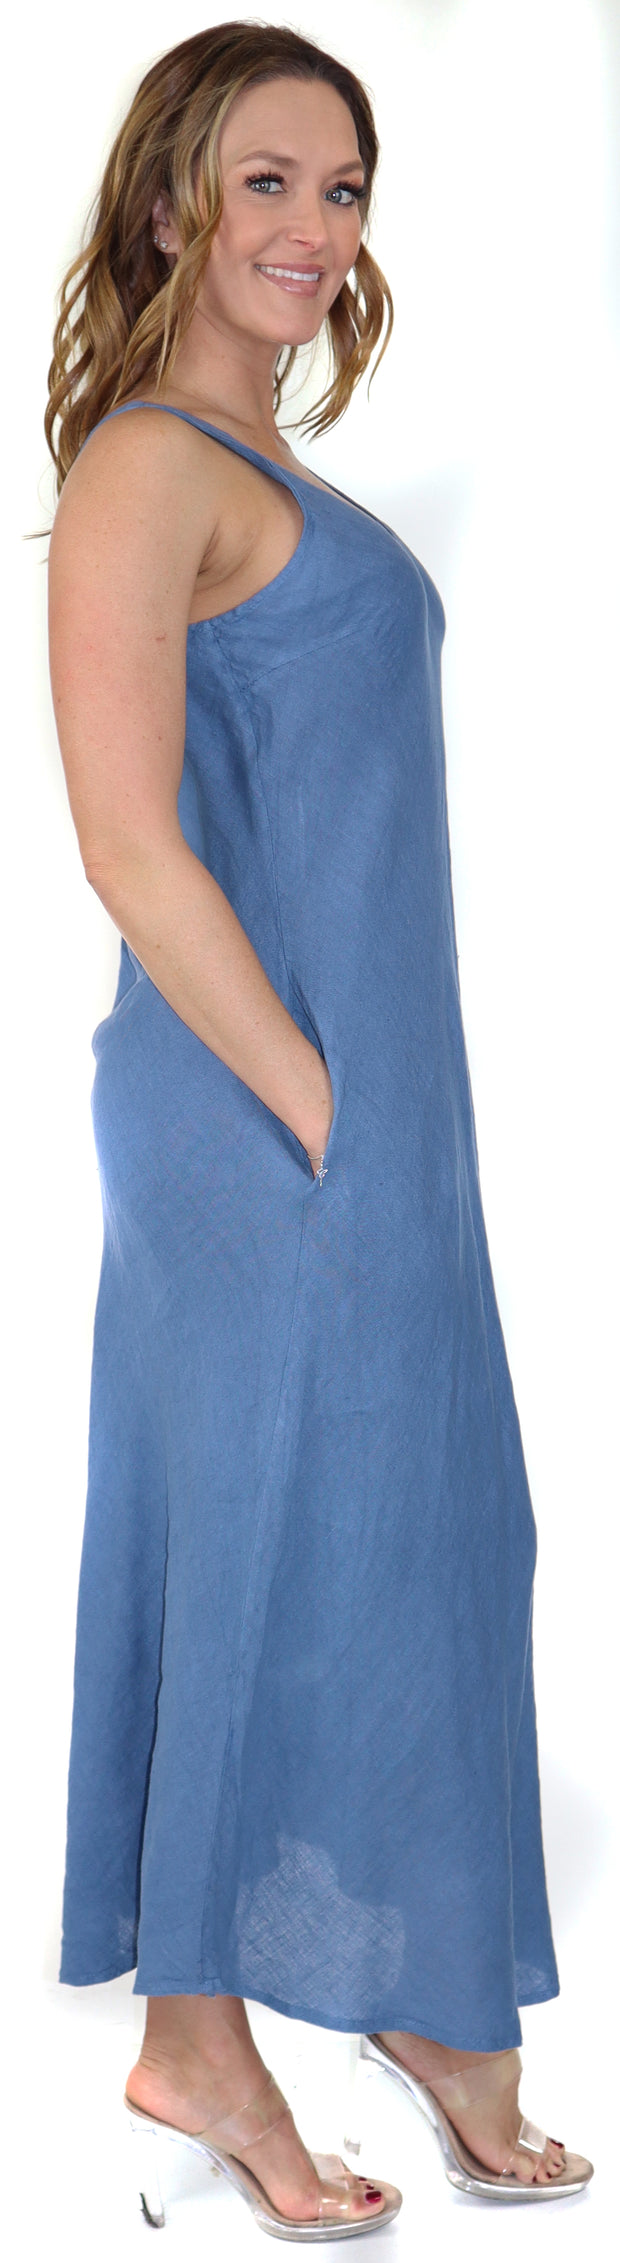 Women's Biased Long Maxi Dress, Perfect Fit Every Time, Made in Italy, 100% linen